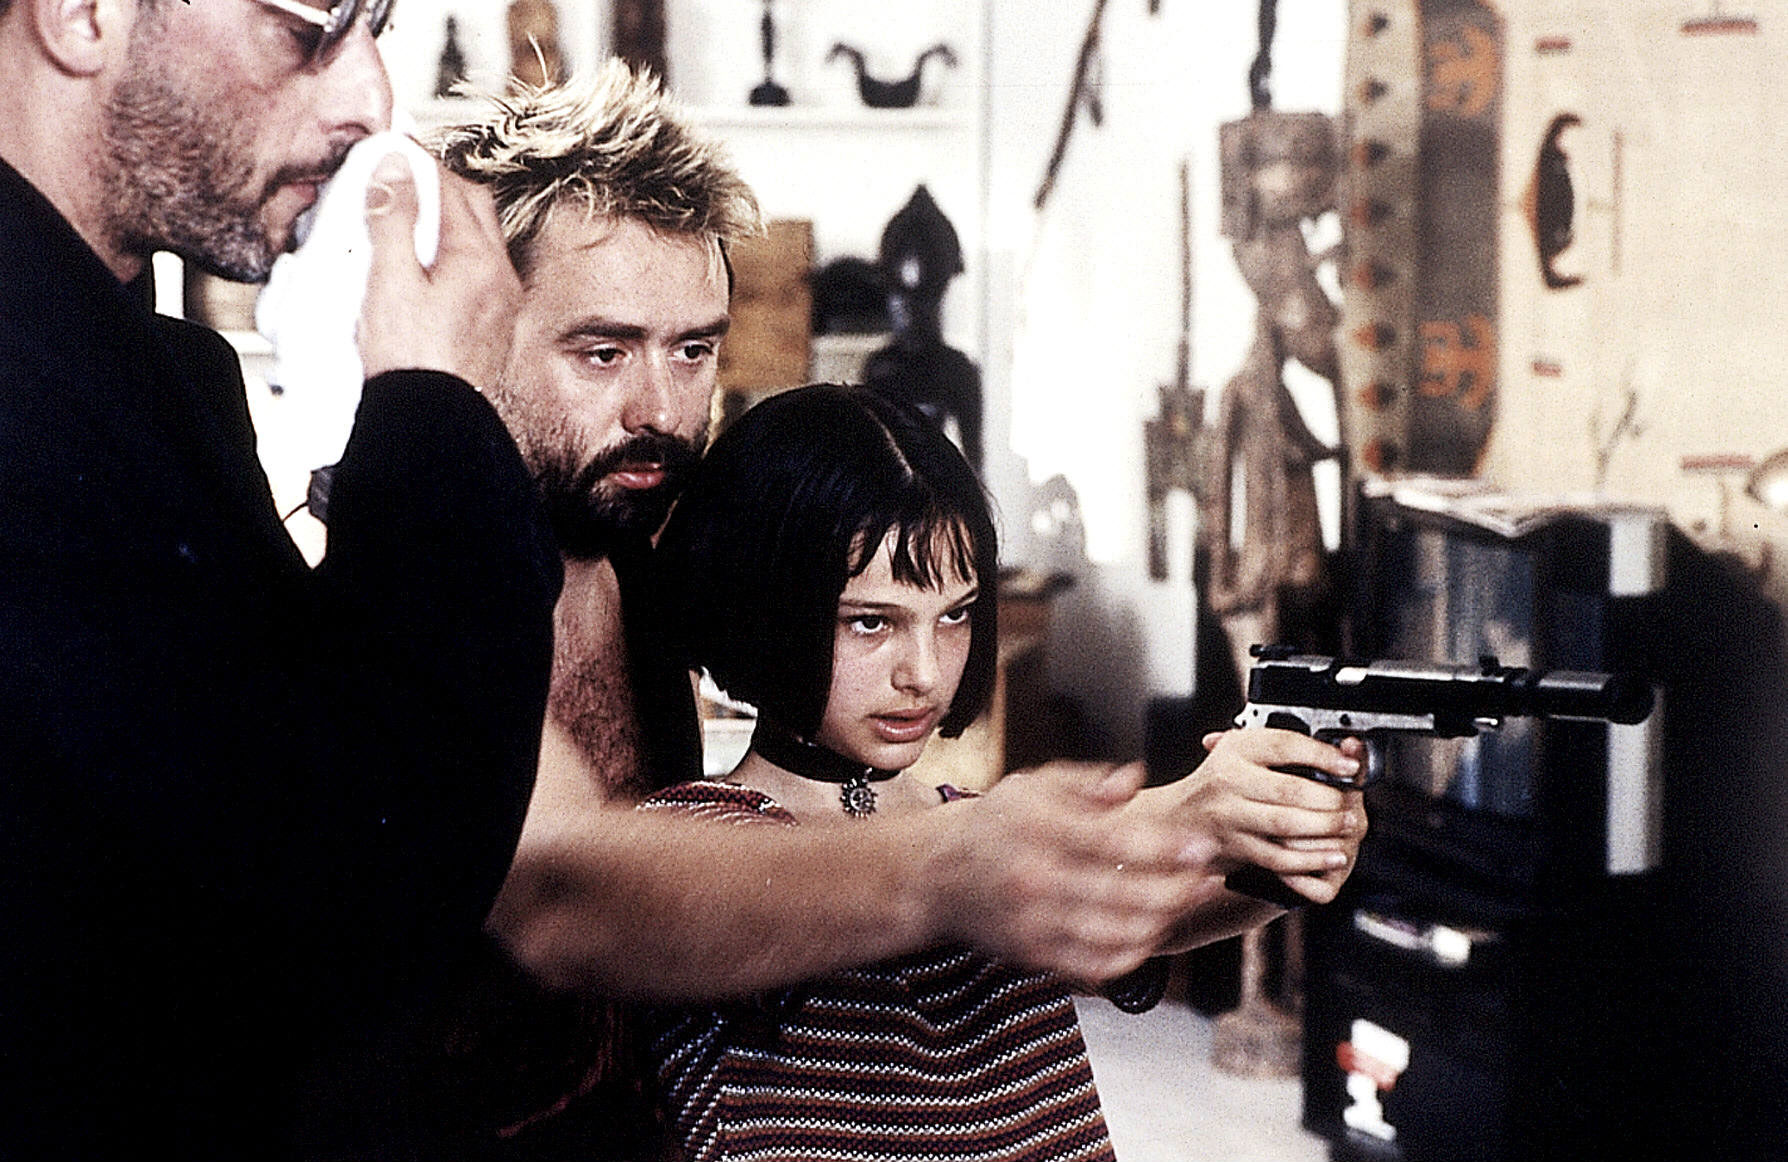 Luc Besson teaches twelve year-old Natalie Portman how to point a gun on the set of "Leon: The Professional"